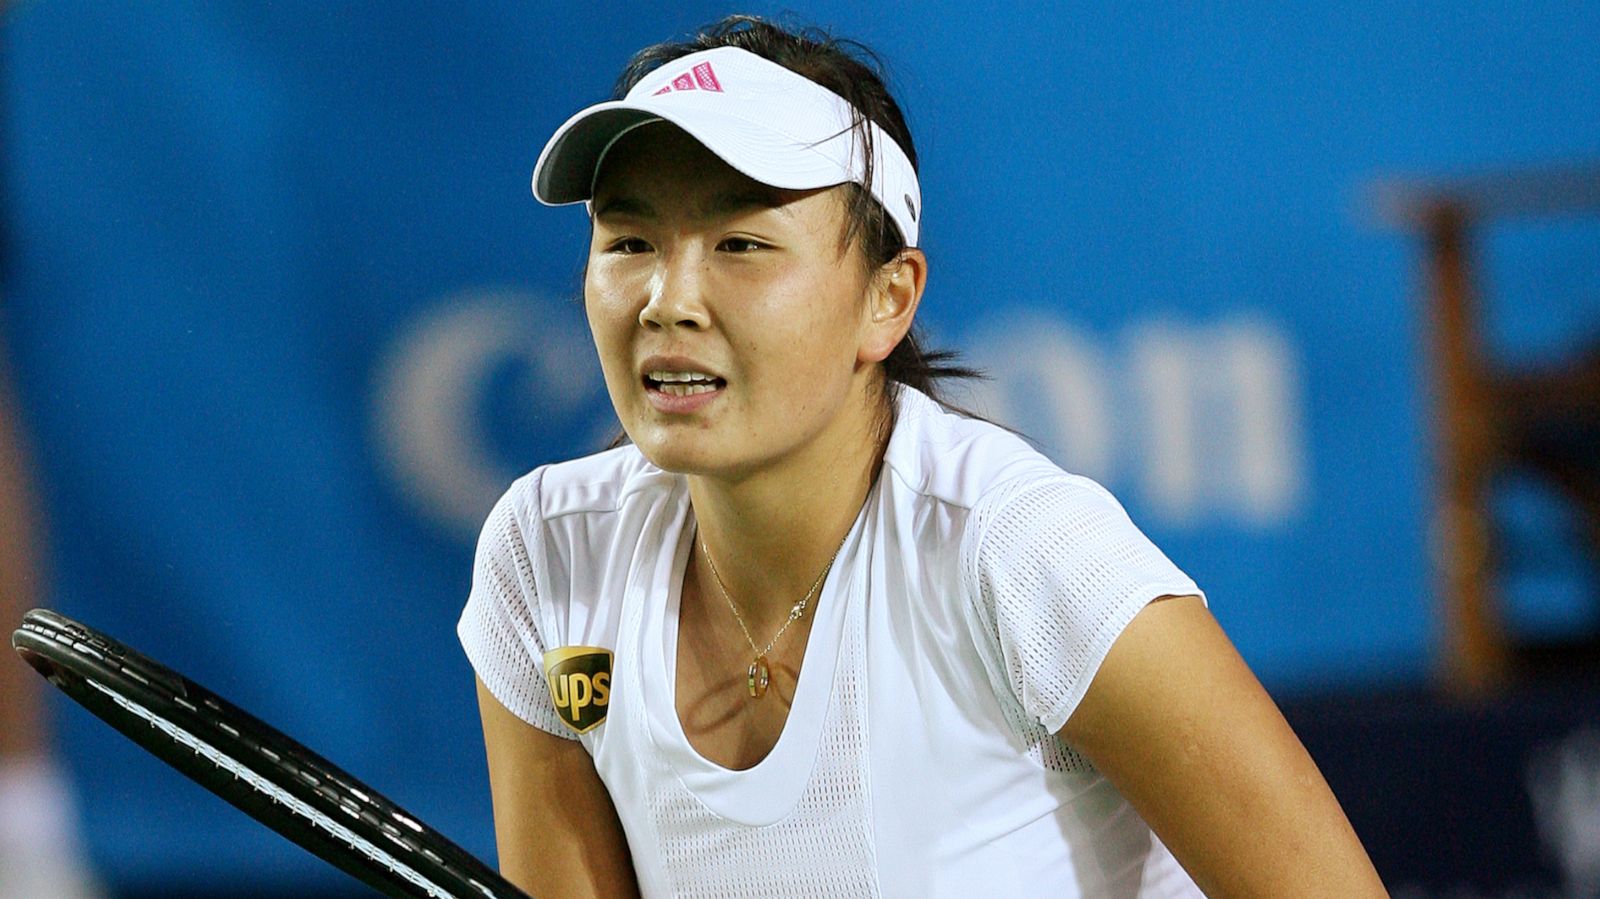 Fears grow for missing Chinese tennis star who accused ex-official of sexual assault